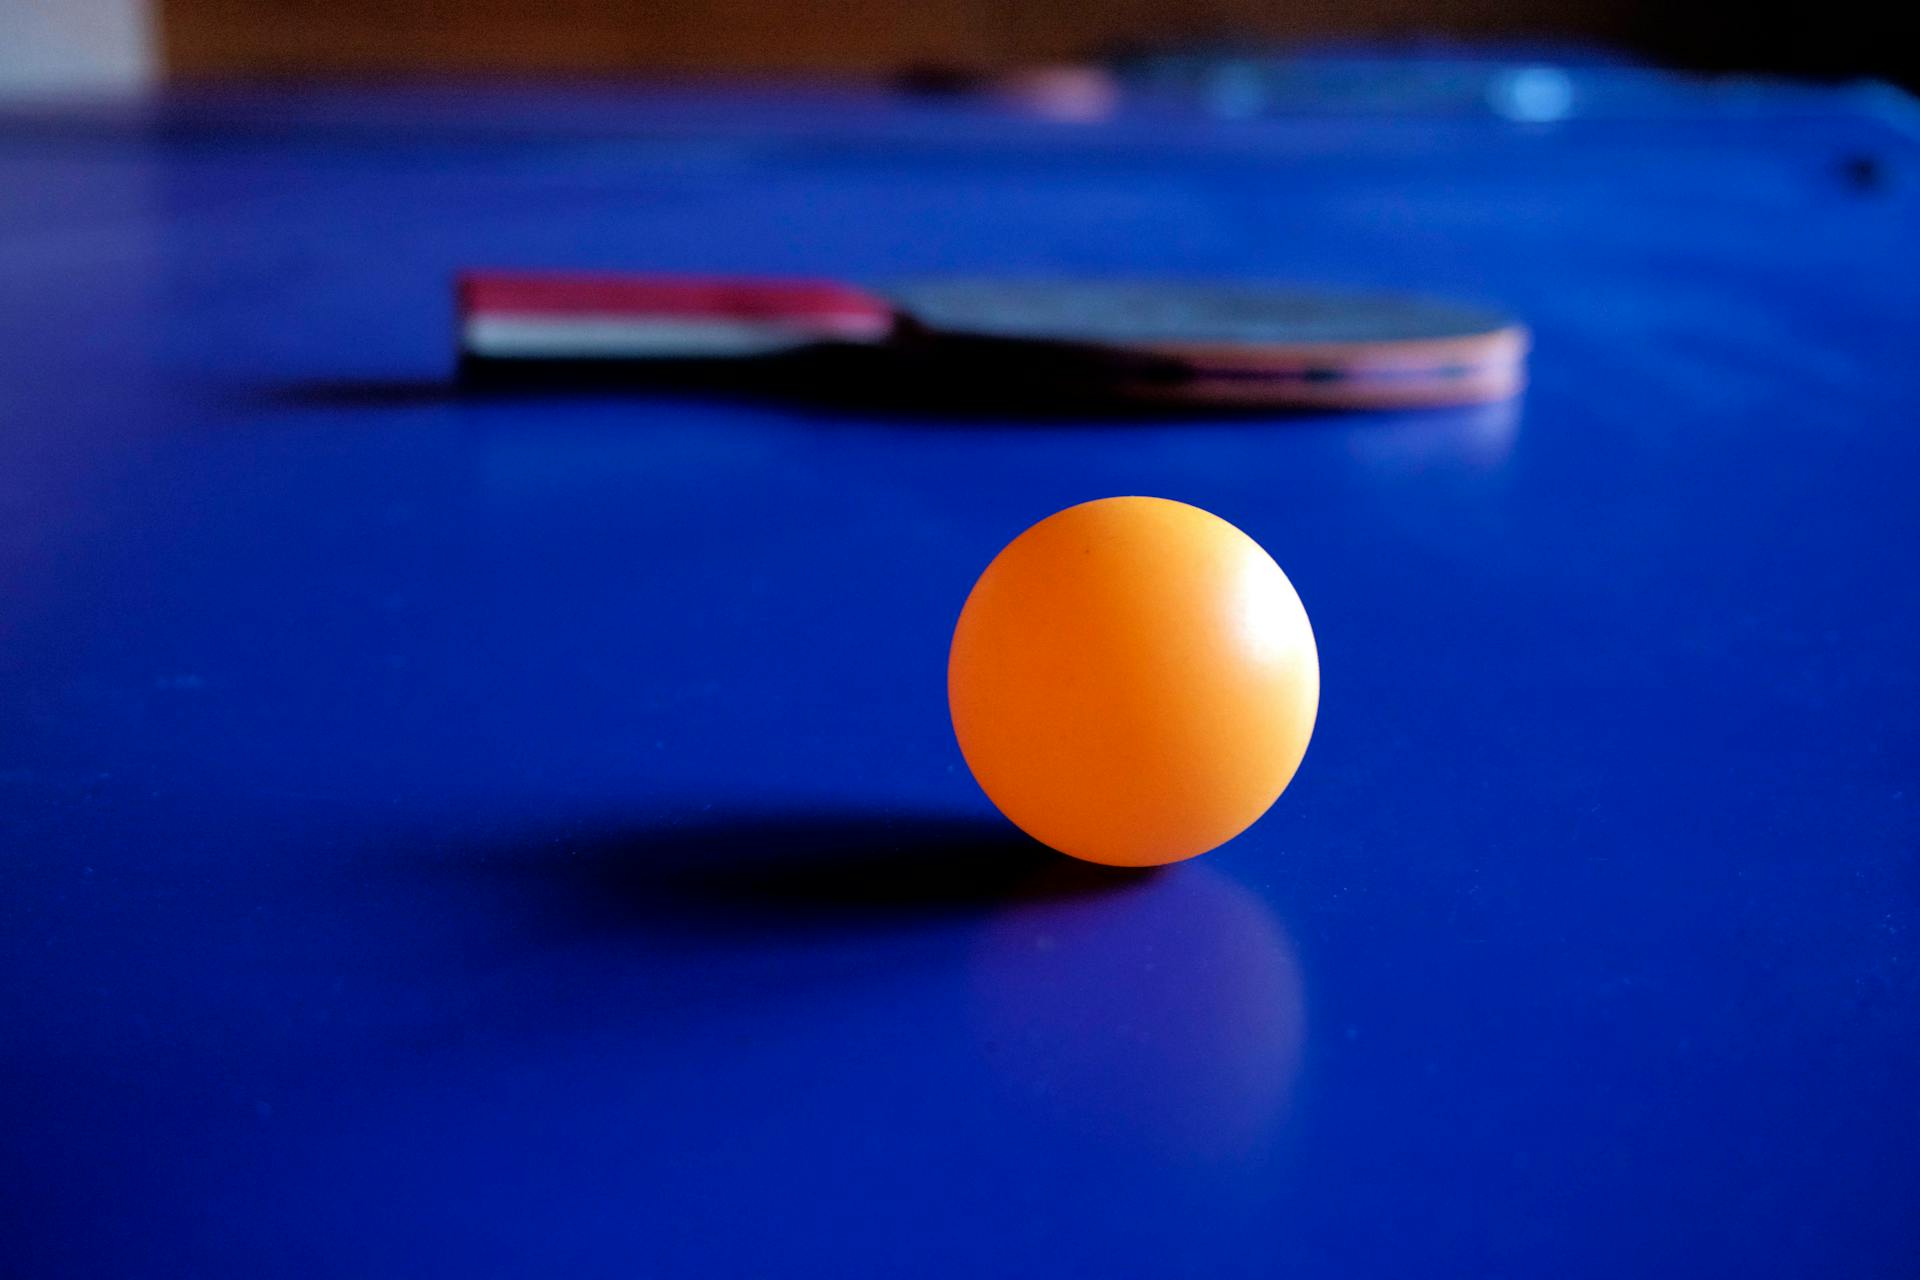 Table tennis betting: analysis of tactics and playing styles of participants